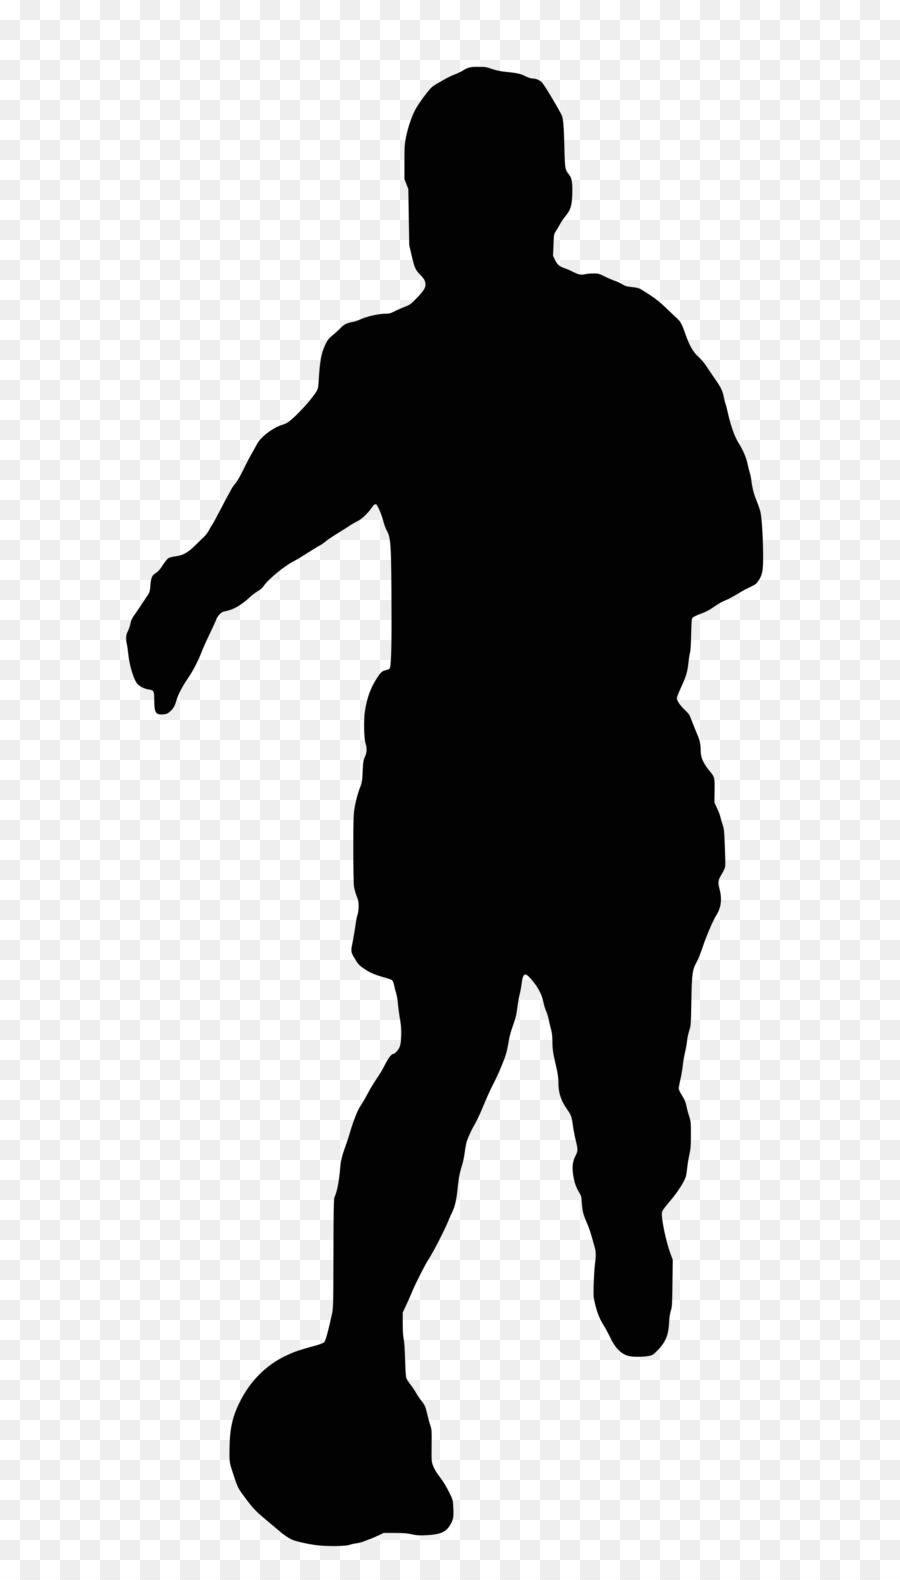 Football player Silhouette - silhouette png download - 2000*3500 - Free Transparent Football Player png Download.